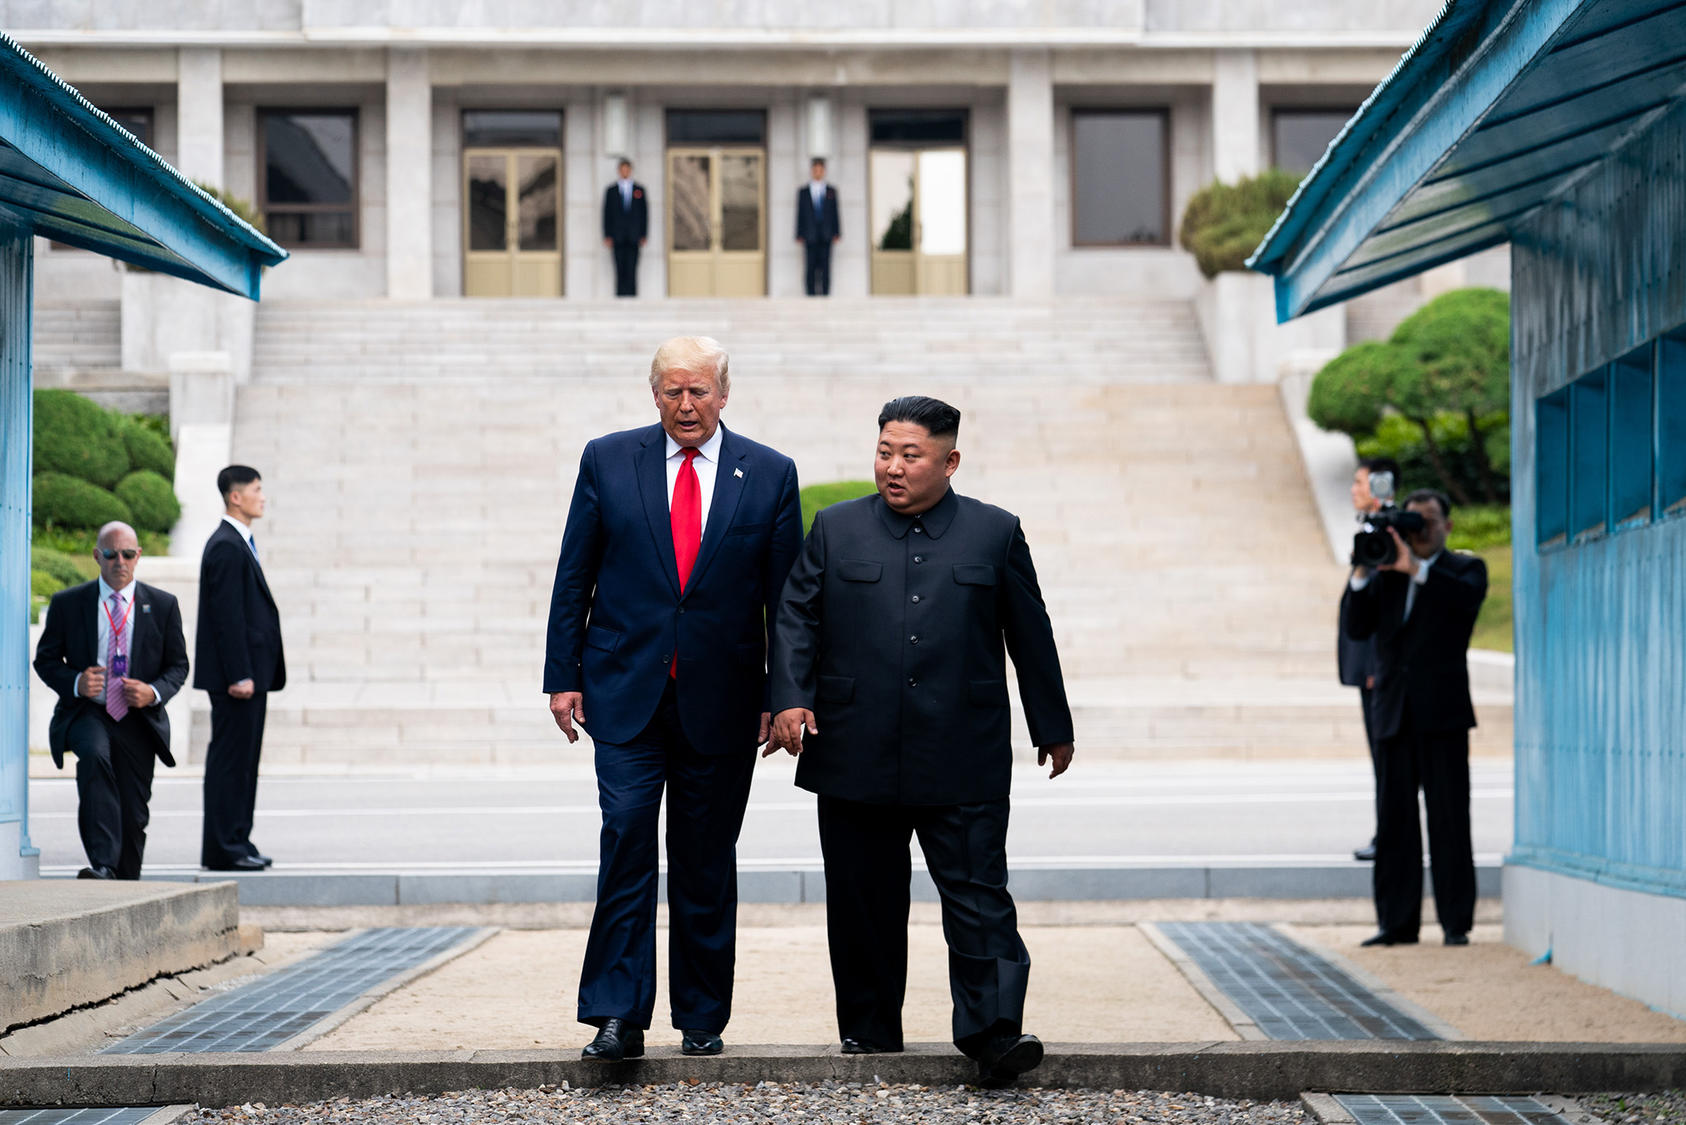 President Donald Trump and North Korea’s Kim Jong Un meet for the third time, Sunday, following their initial summit in Singapore in 2018, and a meeting they cut short in disagreement in February in Hanoi. (Erin Schaff/The New York Times)